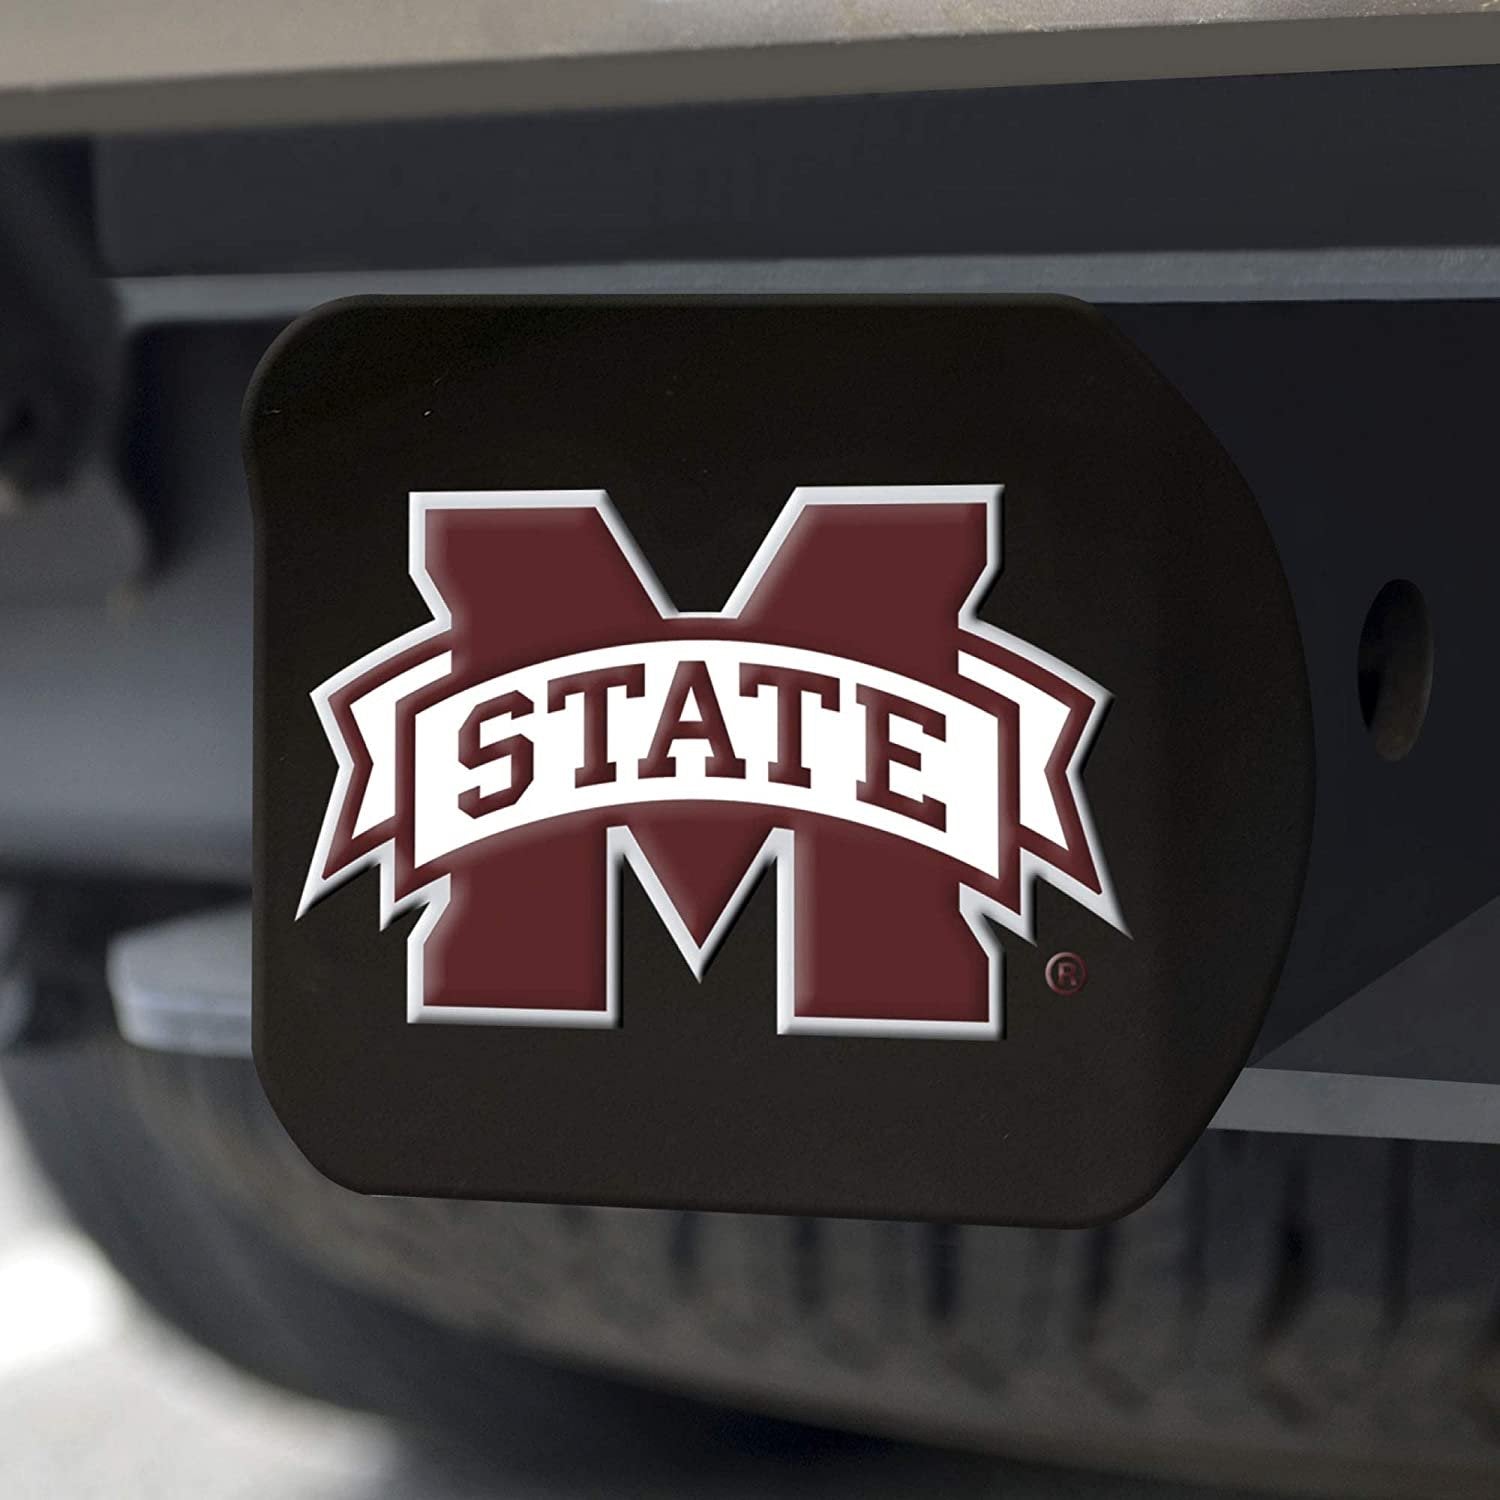 Mississippi State Bulldogs Hitch Cover Black Solid Metal with Raised Color Metal Emblem 2" Square Type III University